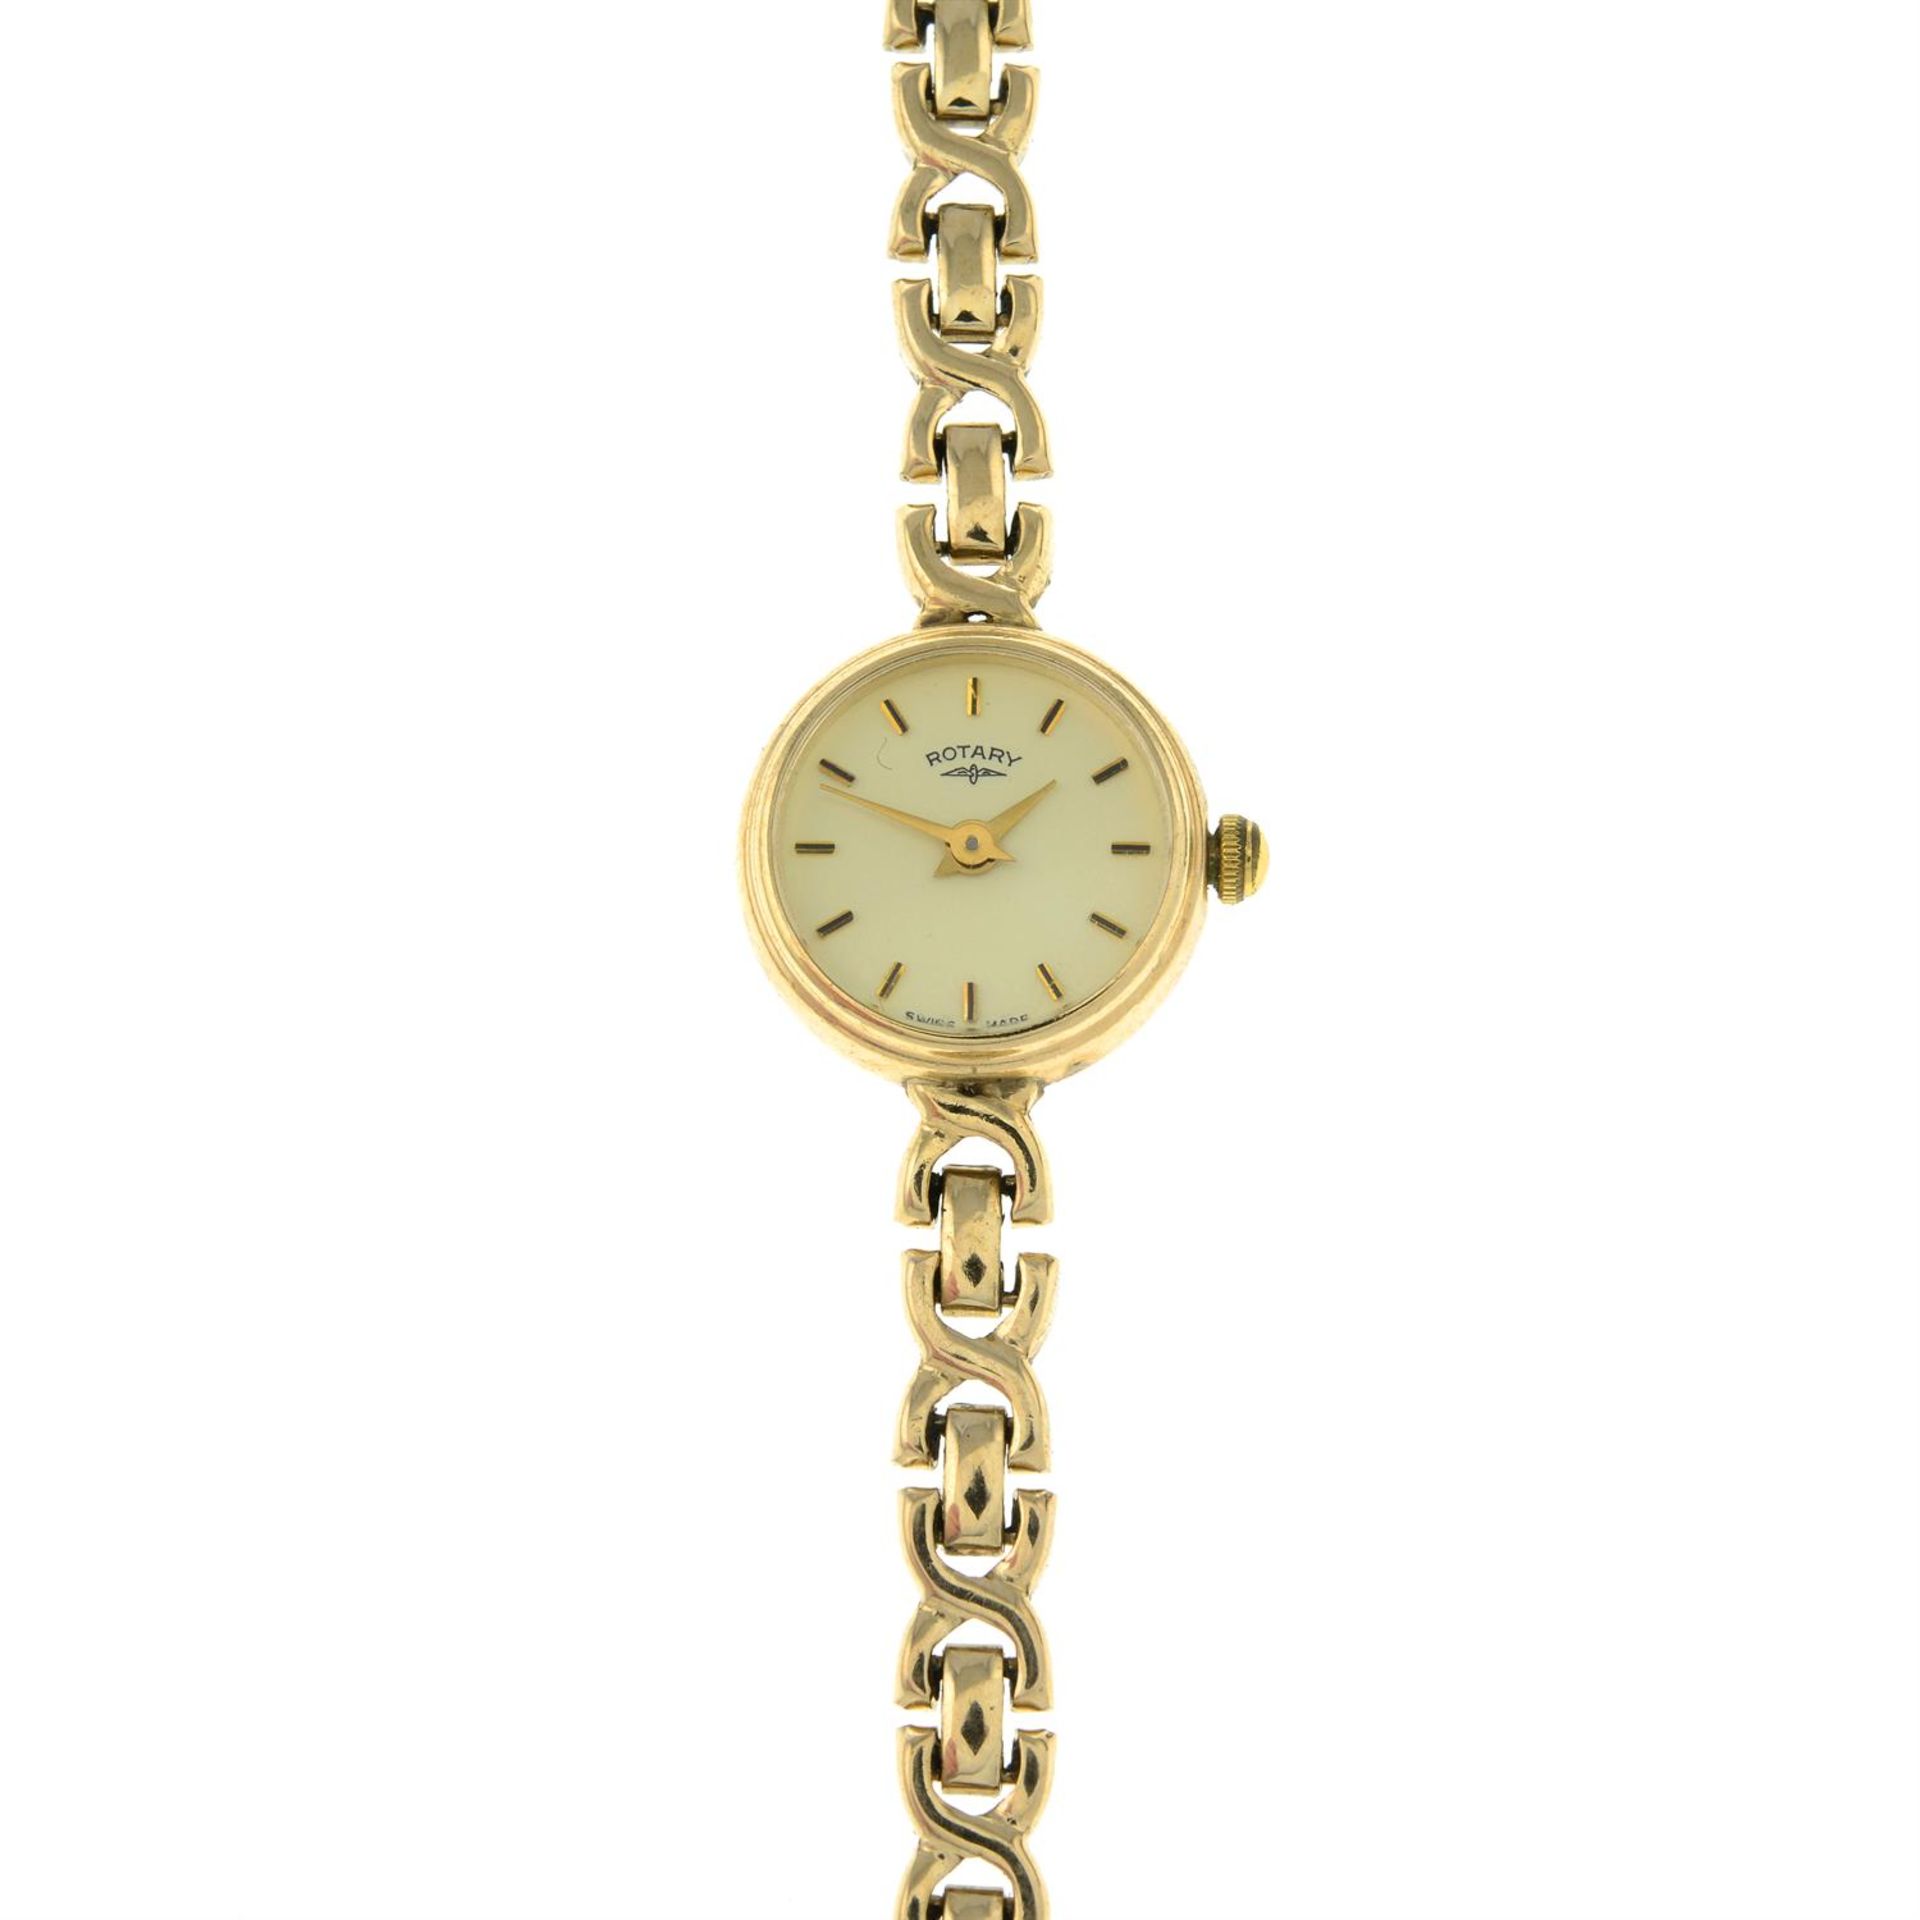 A ladies 9ct gold wrist watch, by Rotary.